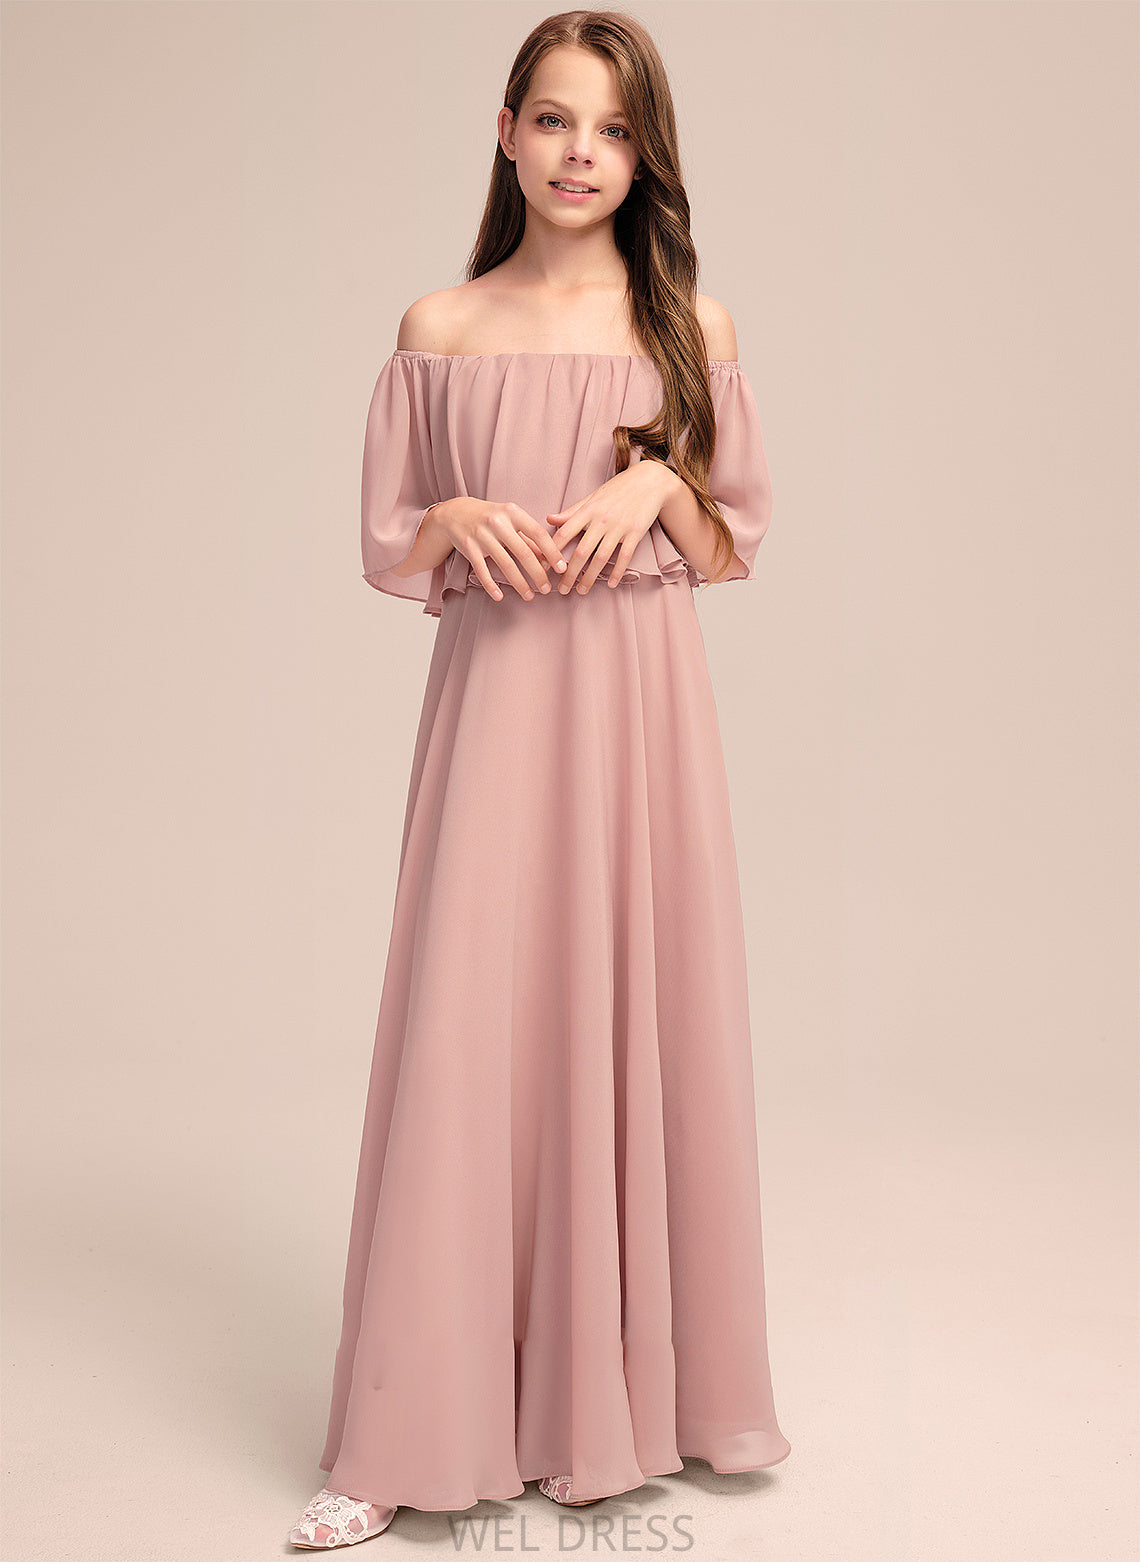 Chiffon With Junior Bridesmaid Dresses Floor-Length A-Line Taliyah Off-the-Shoulder Ruffle